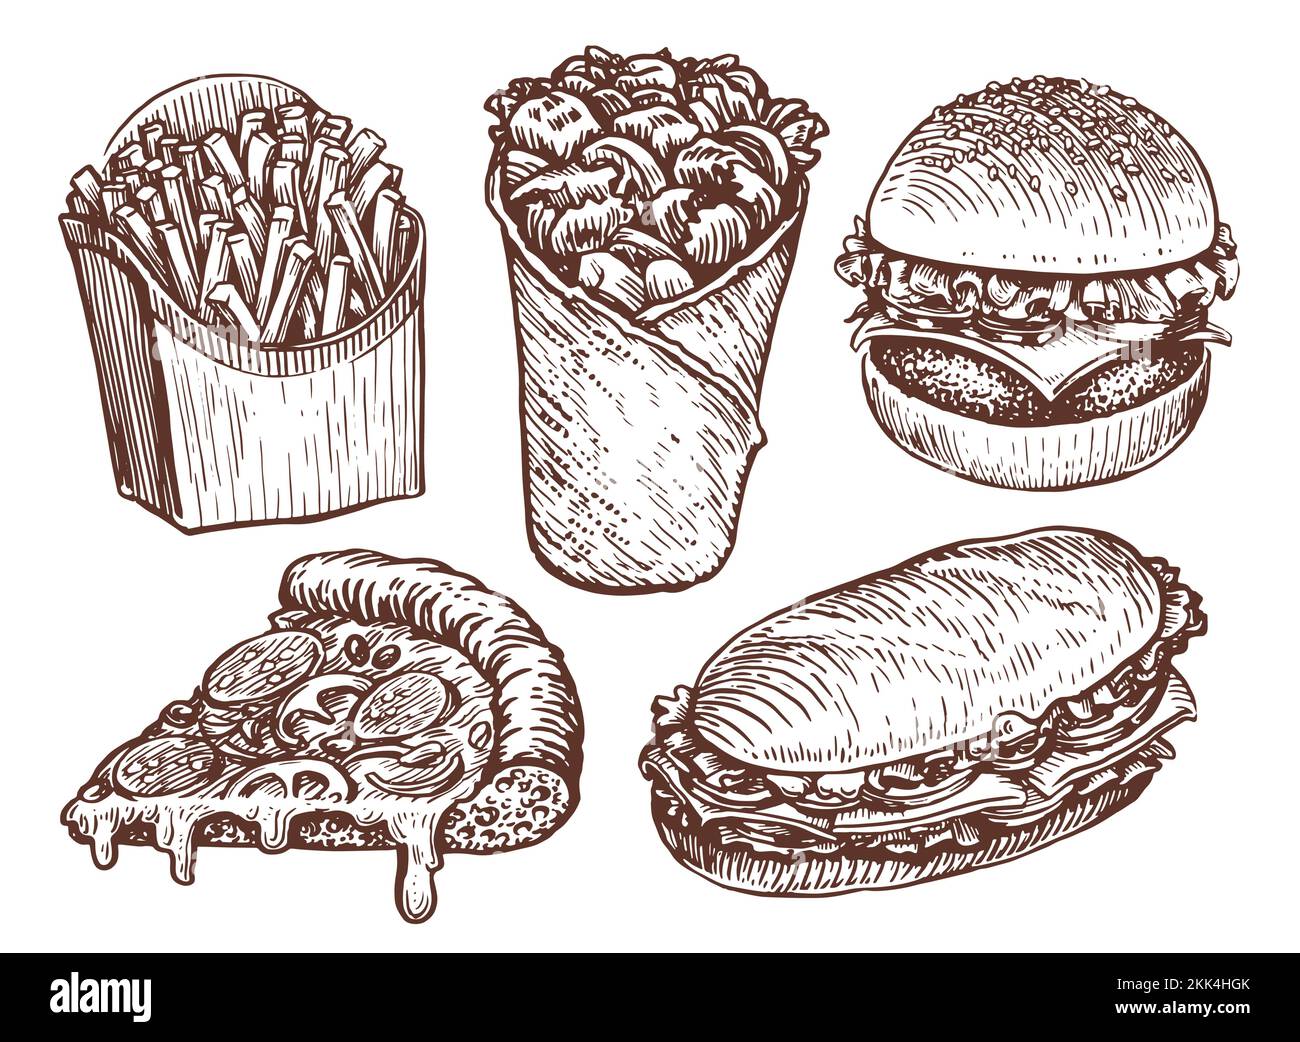 Fast food products. Fries, burrito, burger, sandwich, pizza sketches. Restaurant or diner menu set. Vector illustration Stock Vector